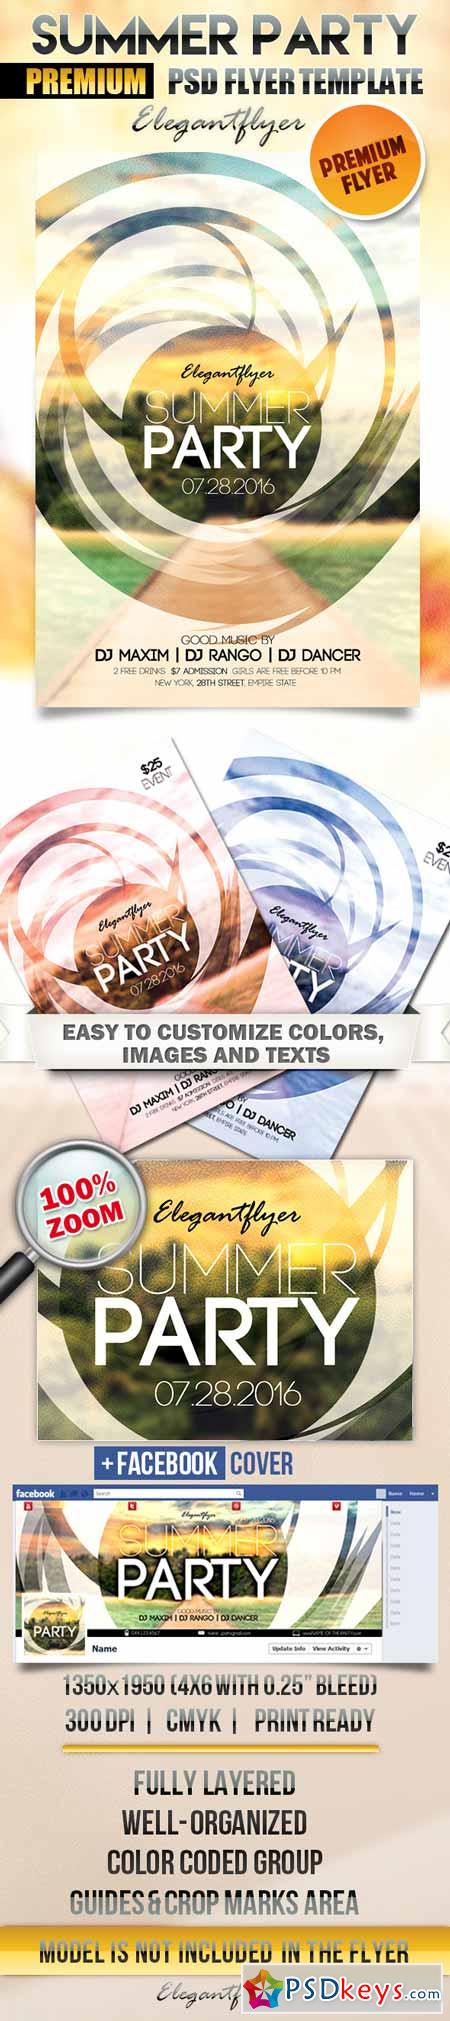 Summer party 6 – Flyer PSD Template + Facebook Cover